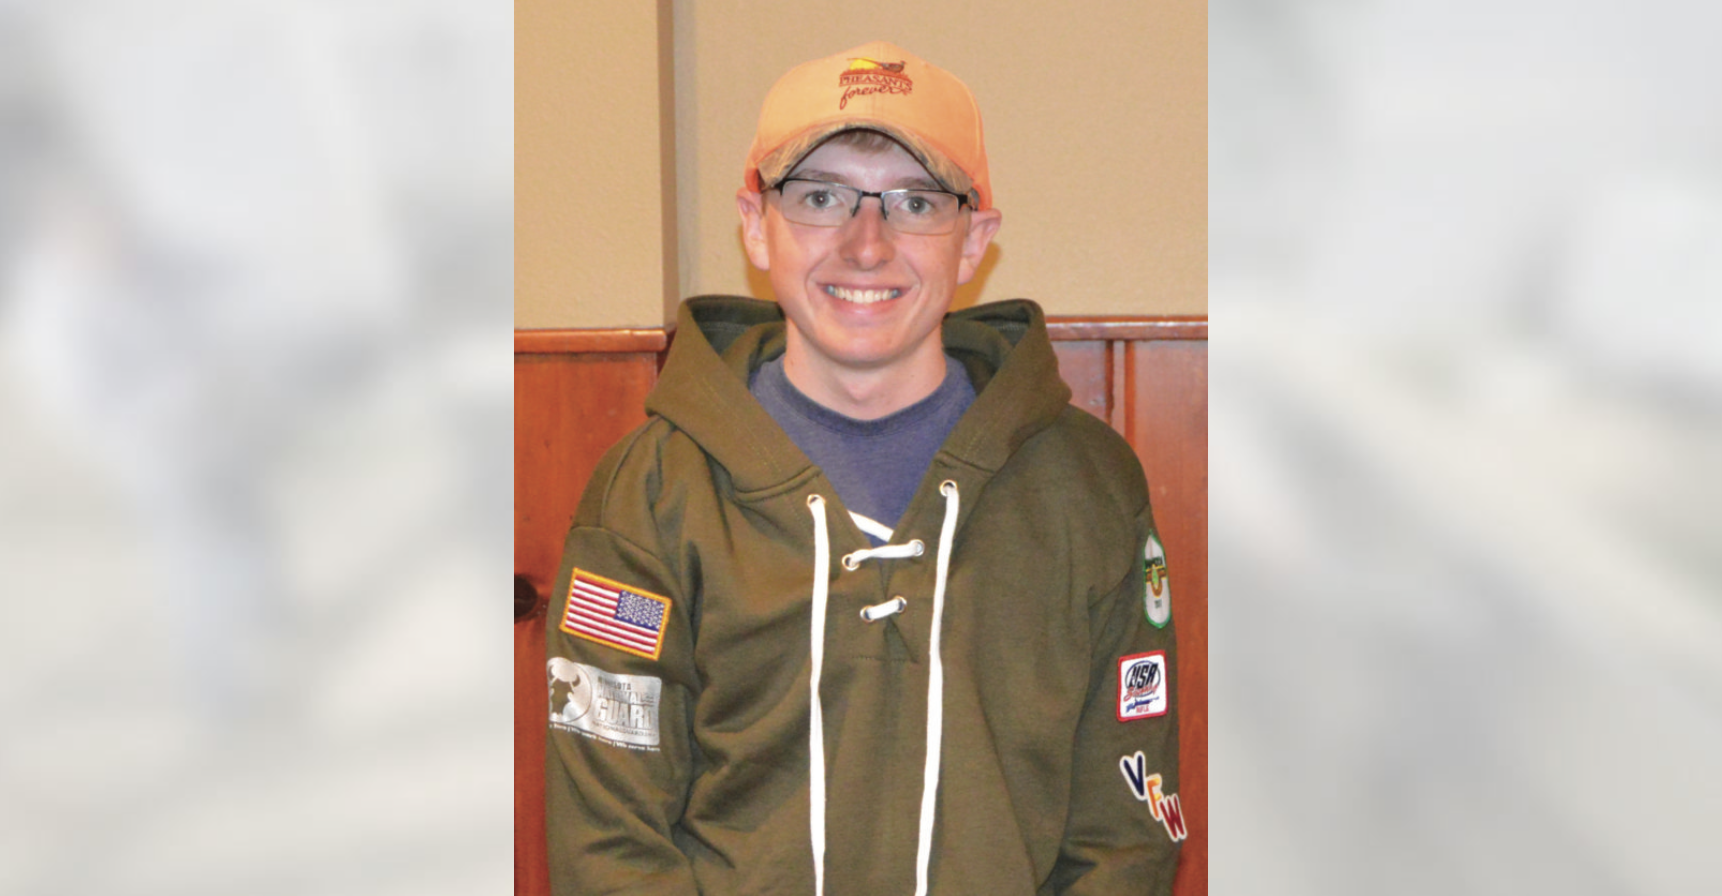 The Independent: Jared Zollner Is Making His Mark On the National Air Rifle Stage